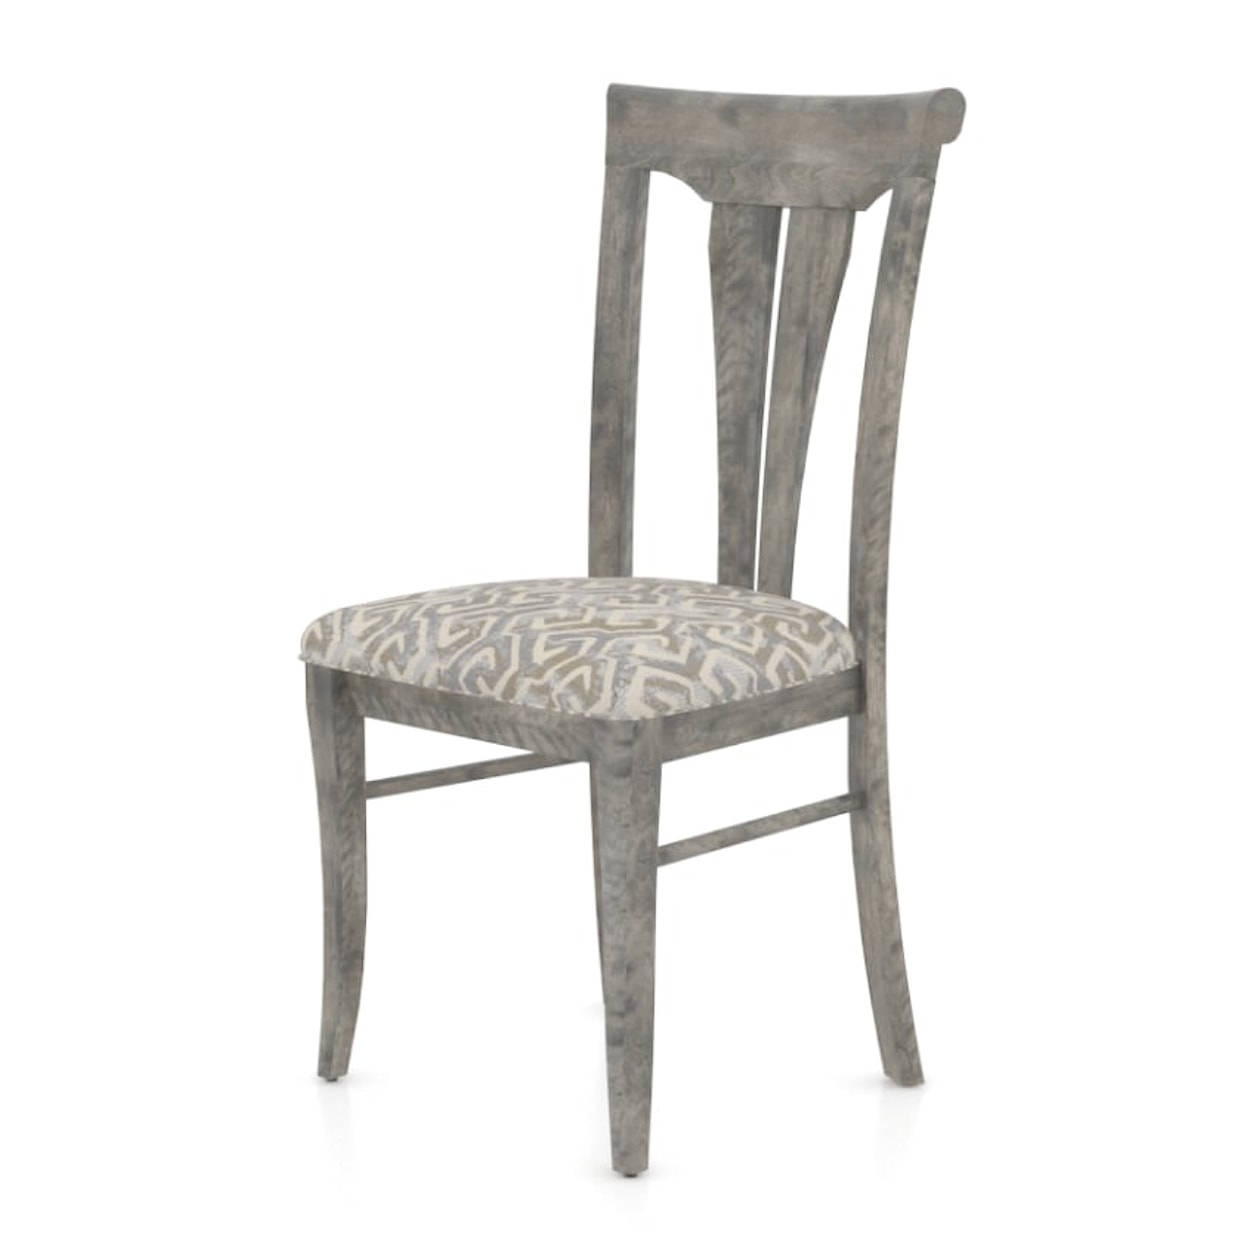 Canadel Dining Sets 0391 Dining Chair